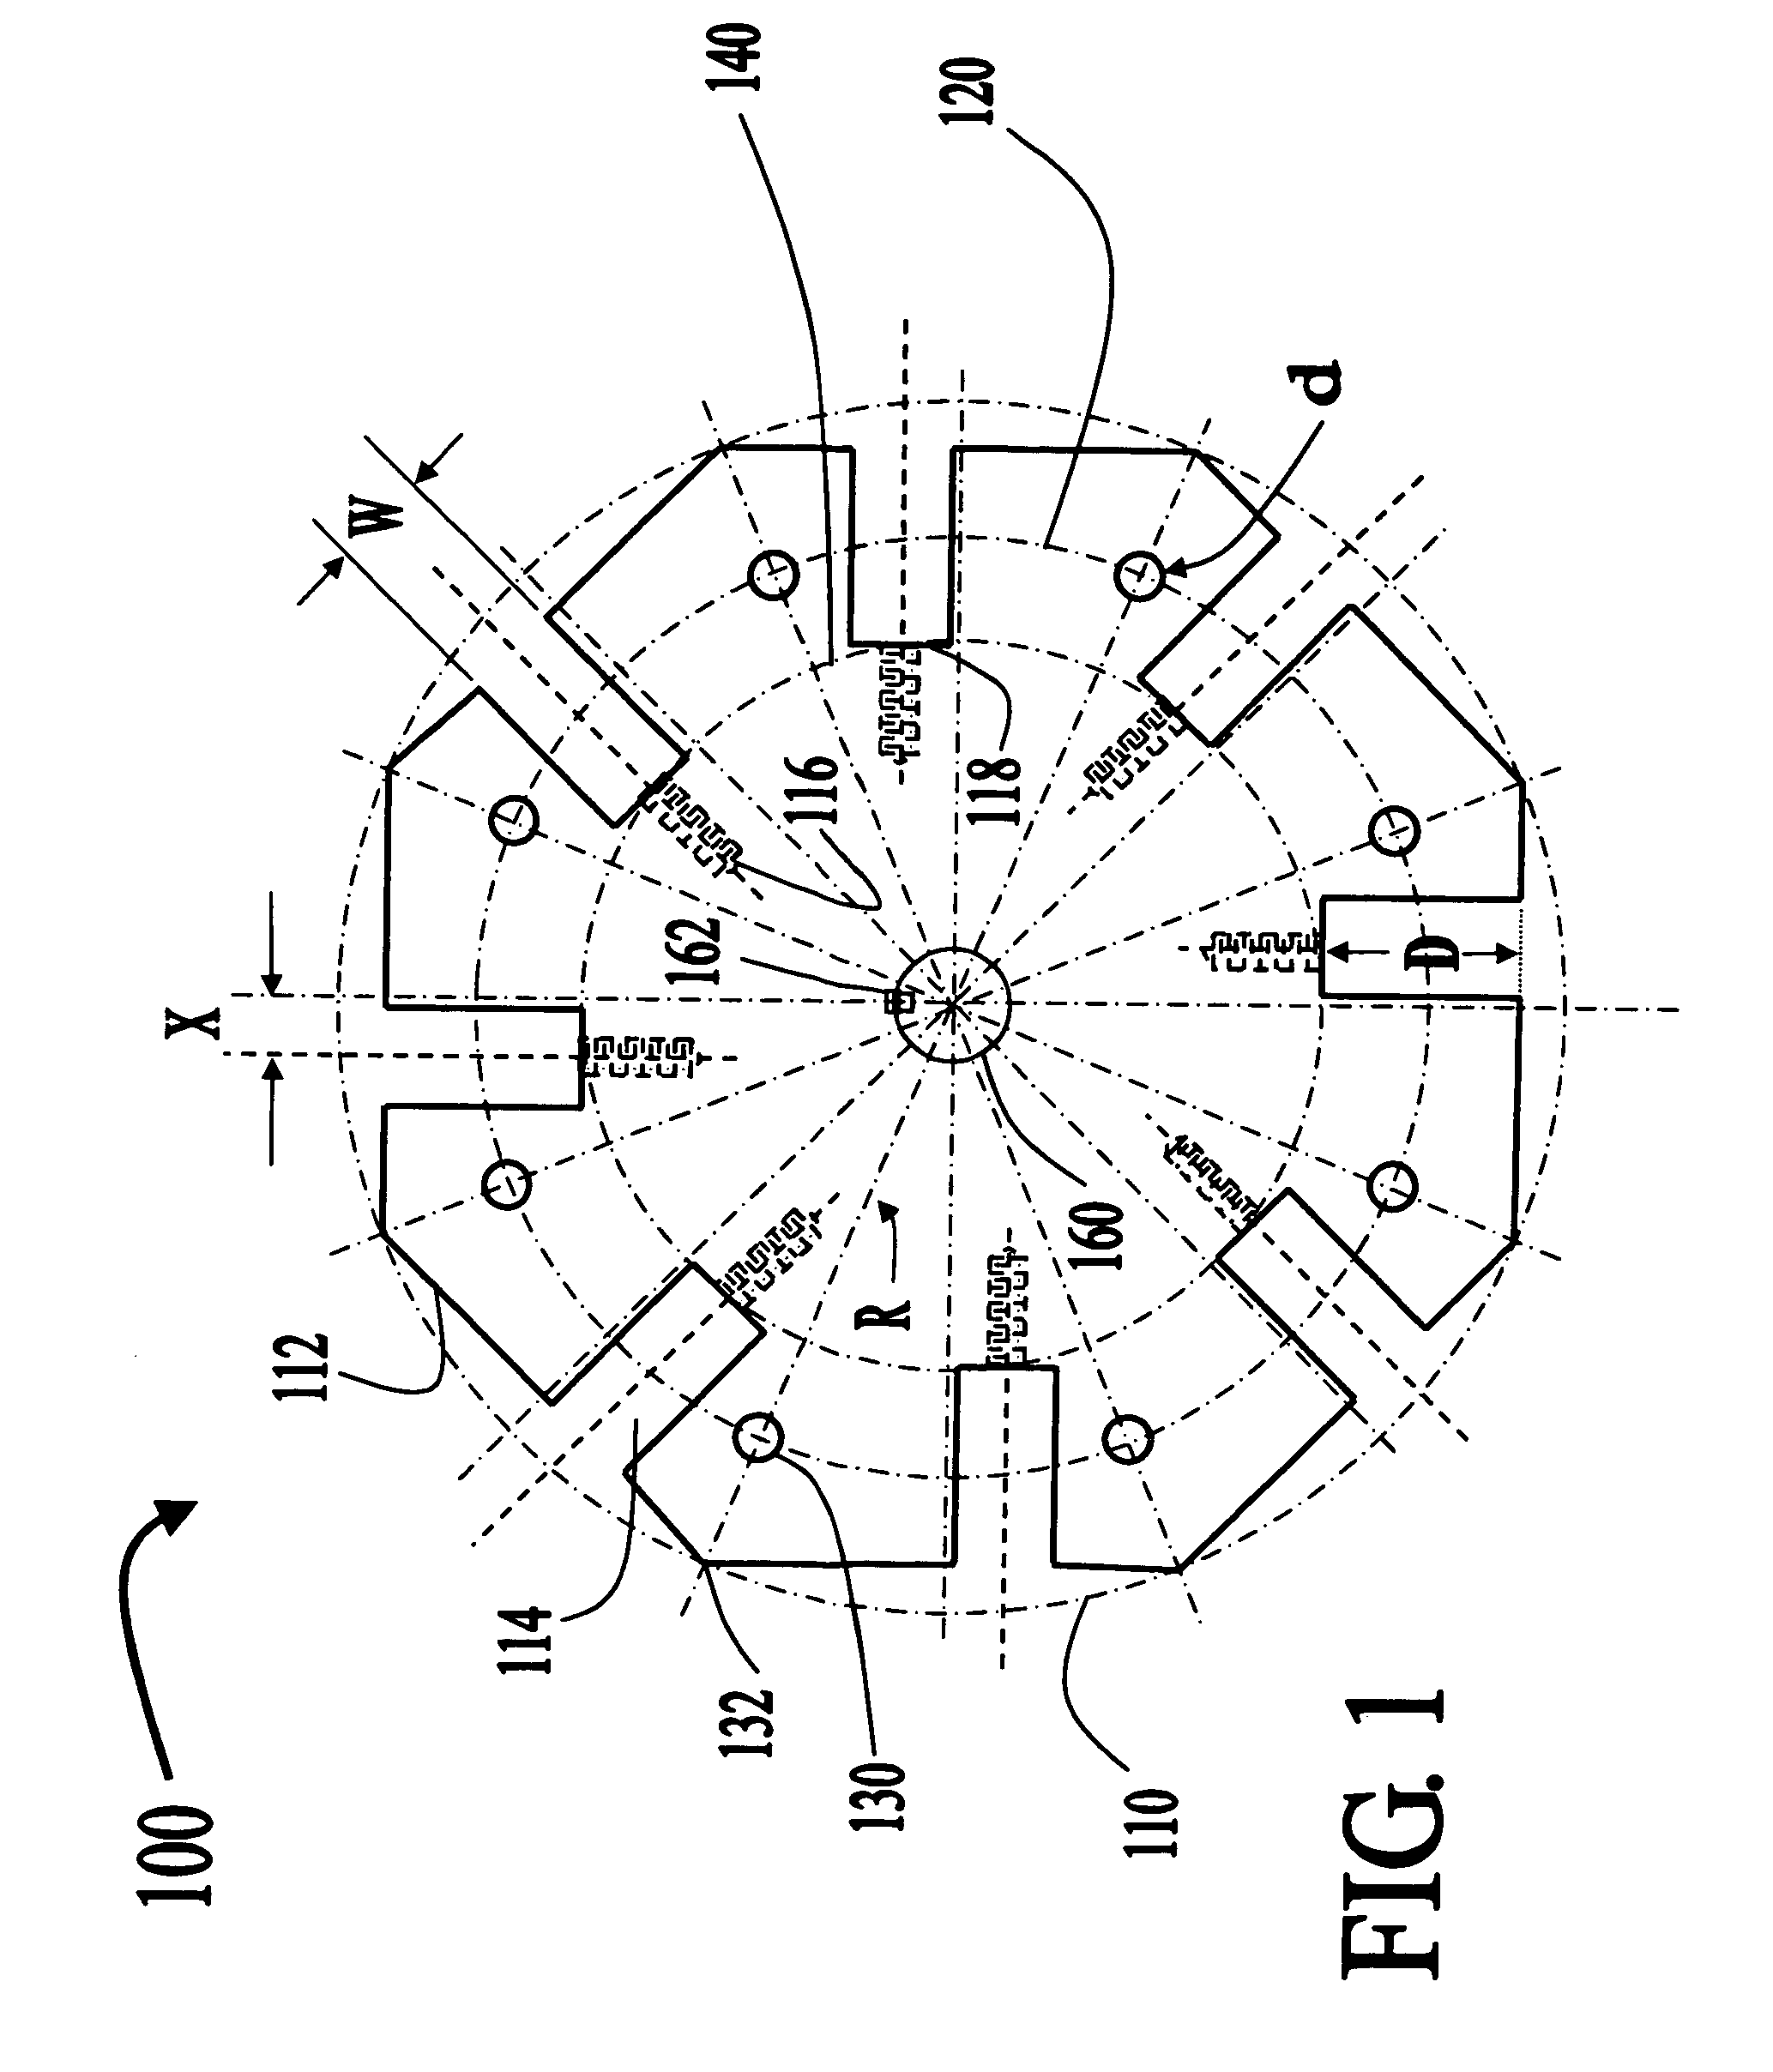 Torque transfer system, method of using the same, method of fabricating the same, and apparatus for monitoring the same